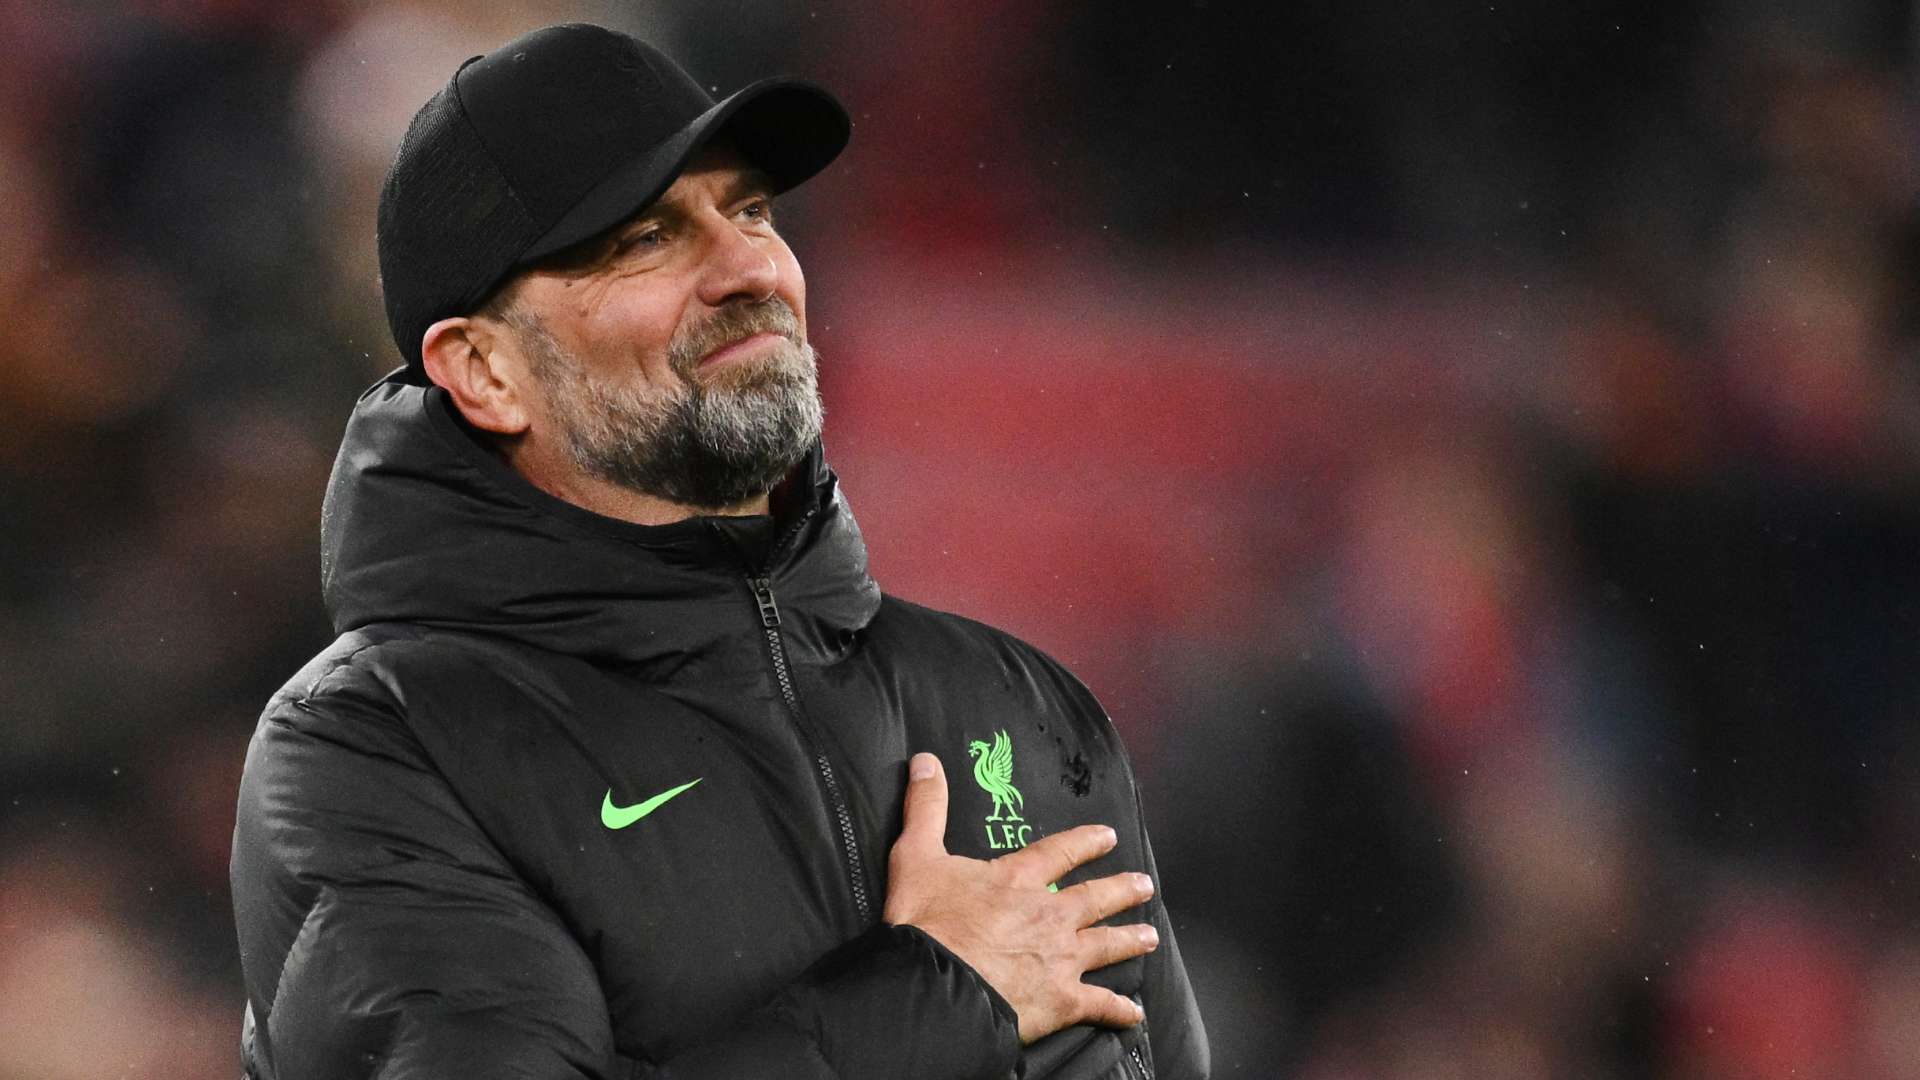 Jurgen Klopp to retire?! Departing Liverpool boss hints he could call time  on management career as he vows never to take charge of another club in  England | Goal.com